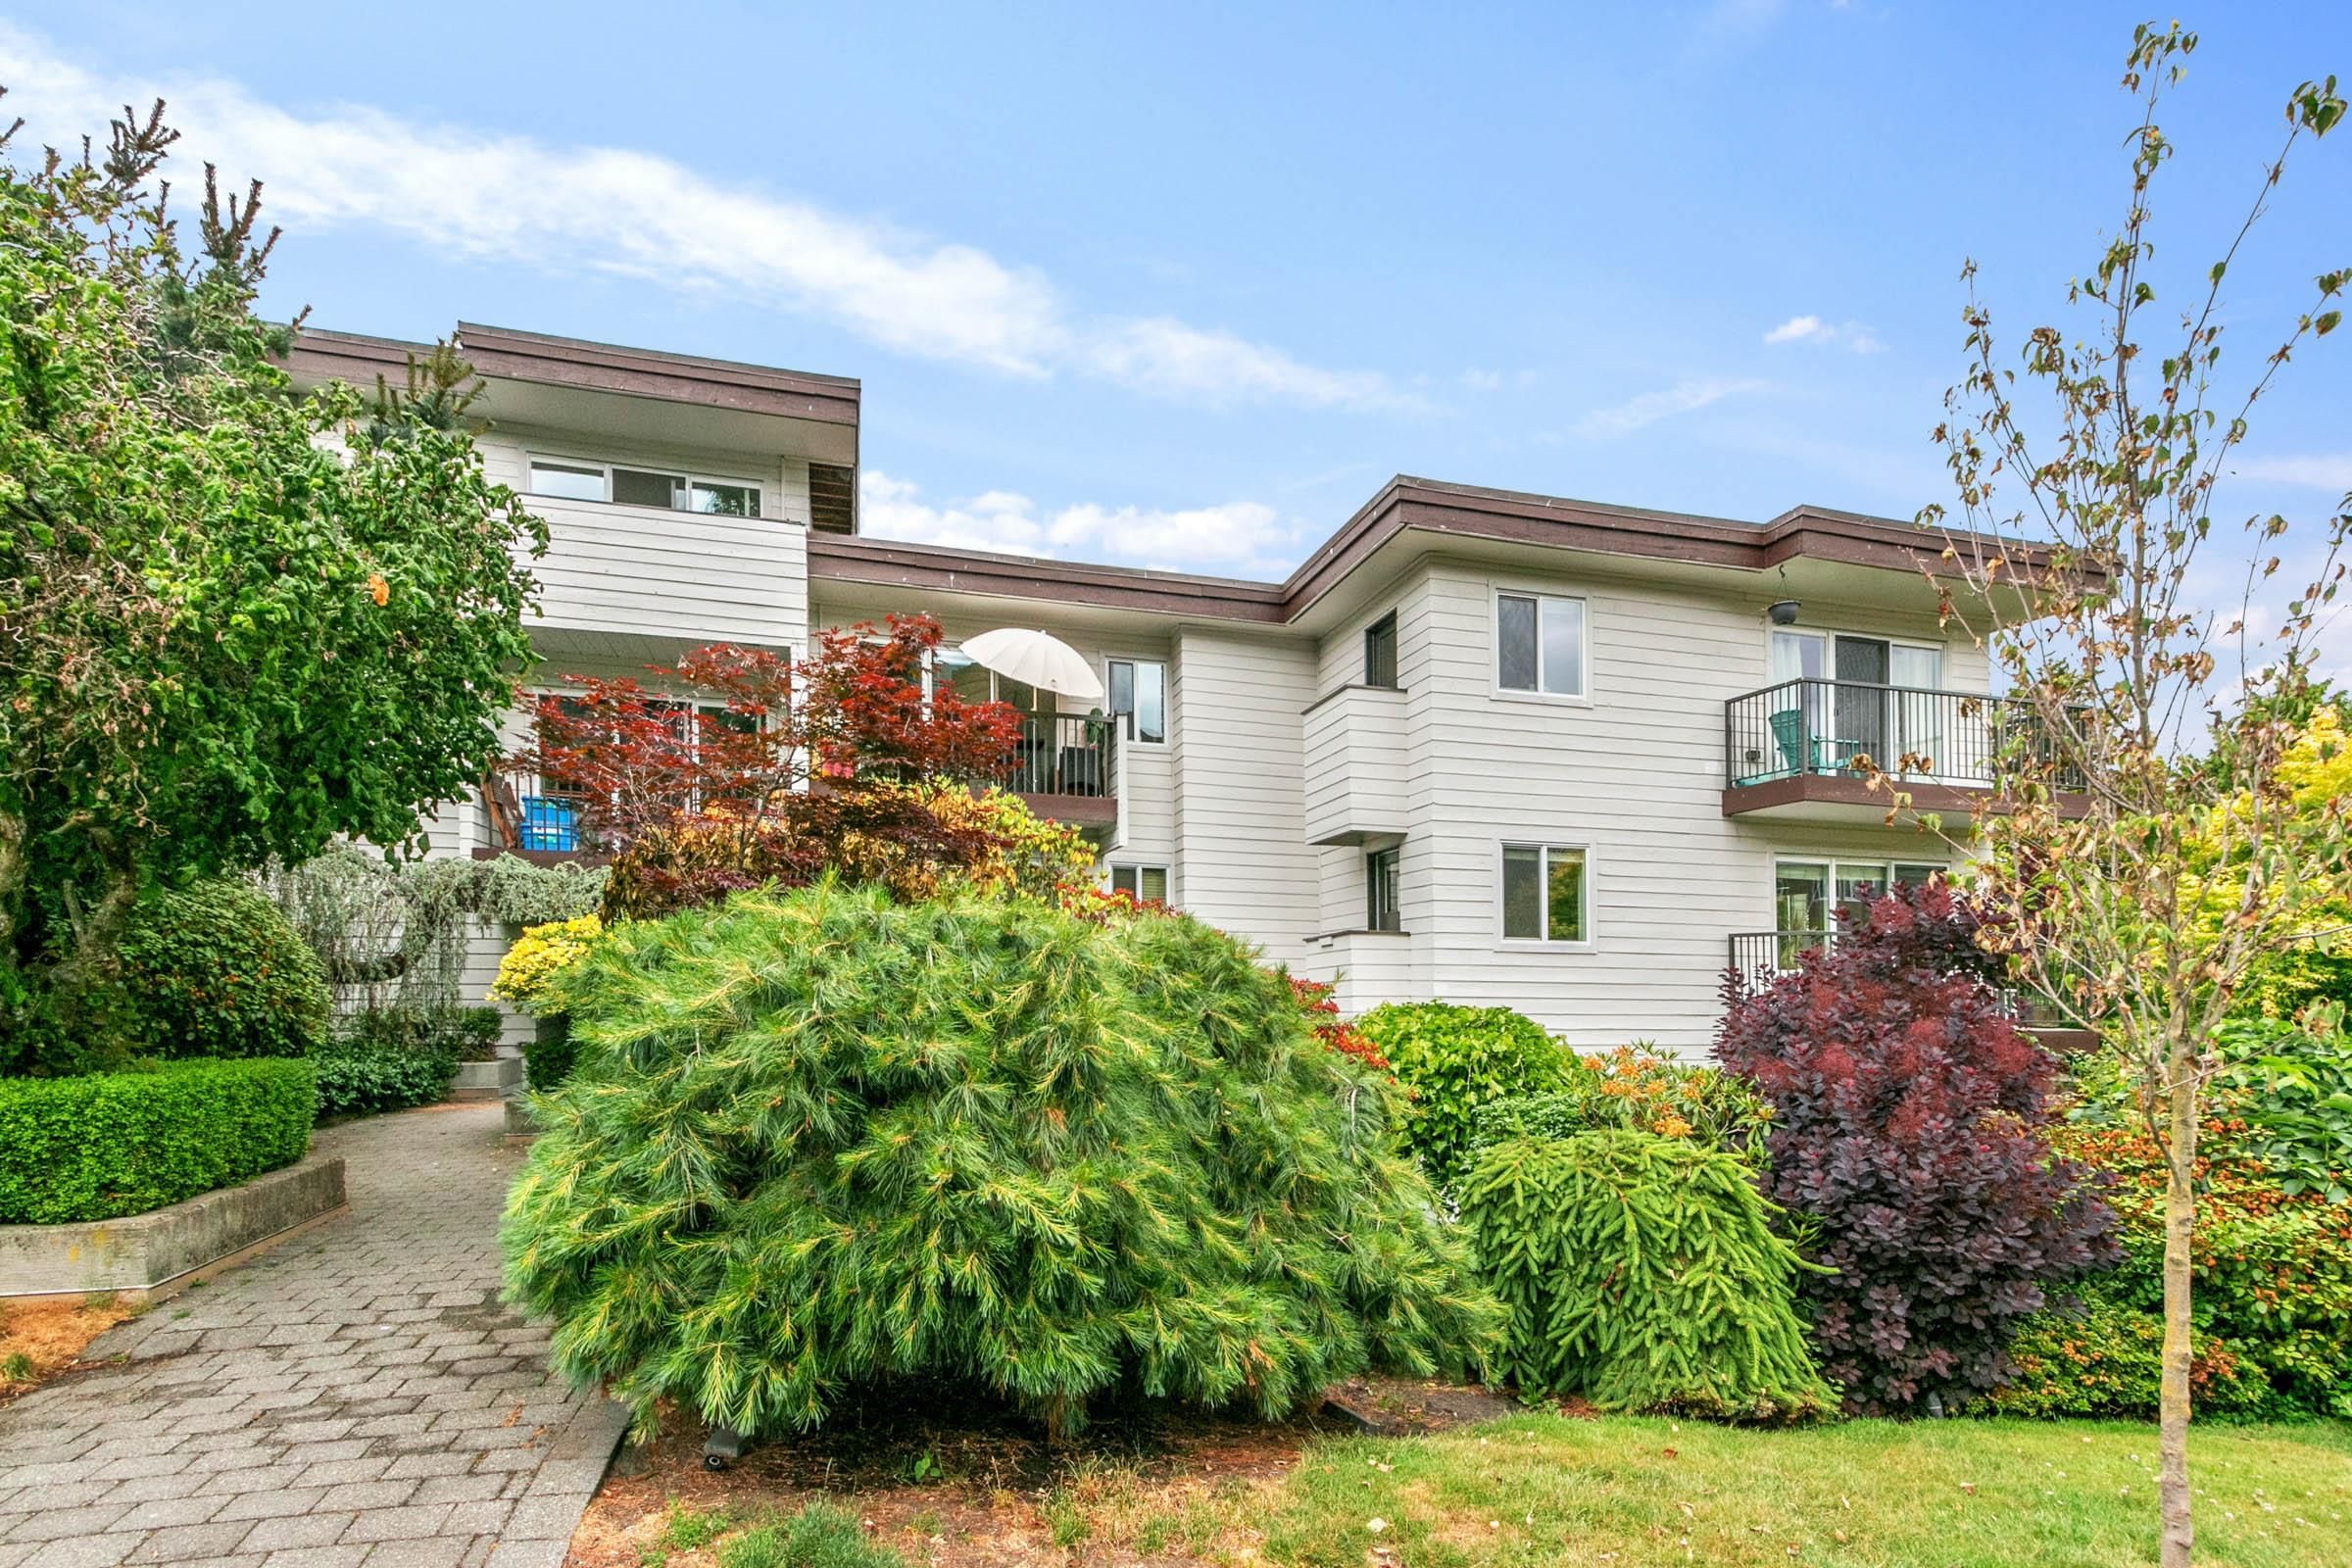 I have sold a property at 307 2125 2ND AVE W in Vancouver
